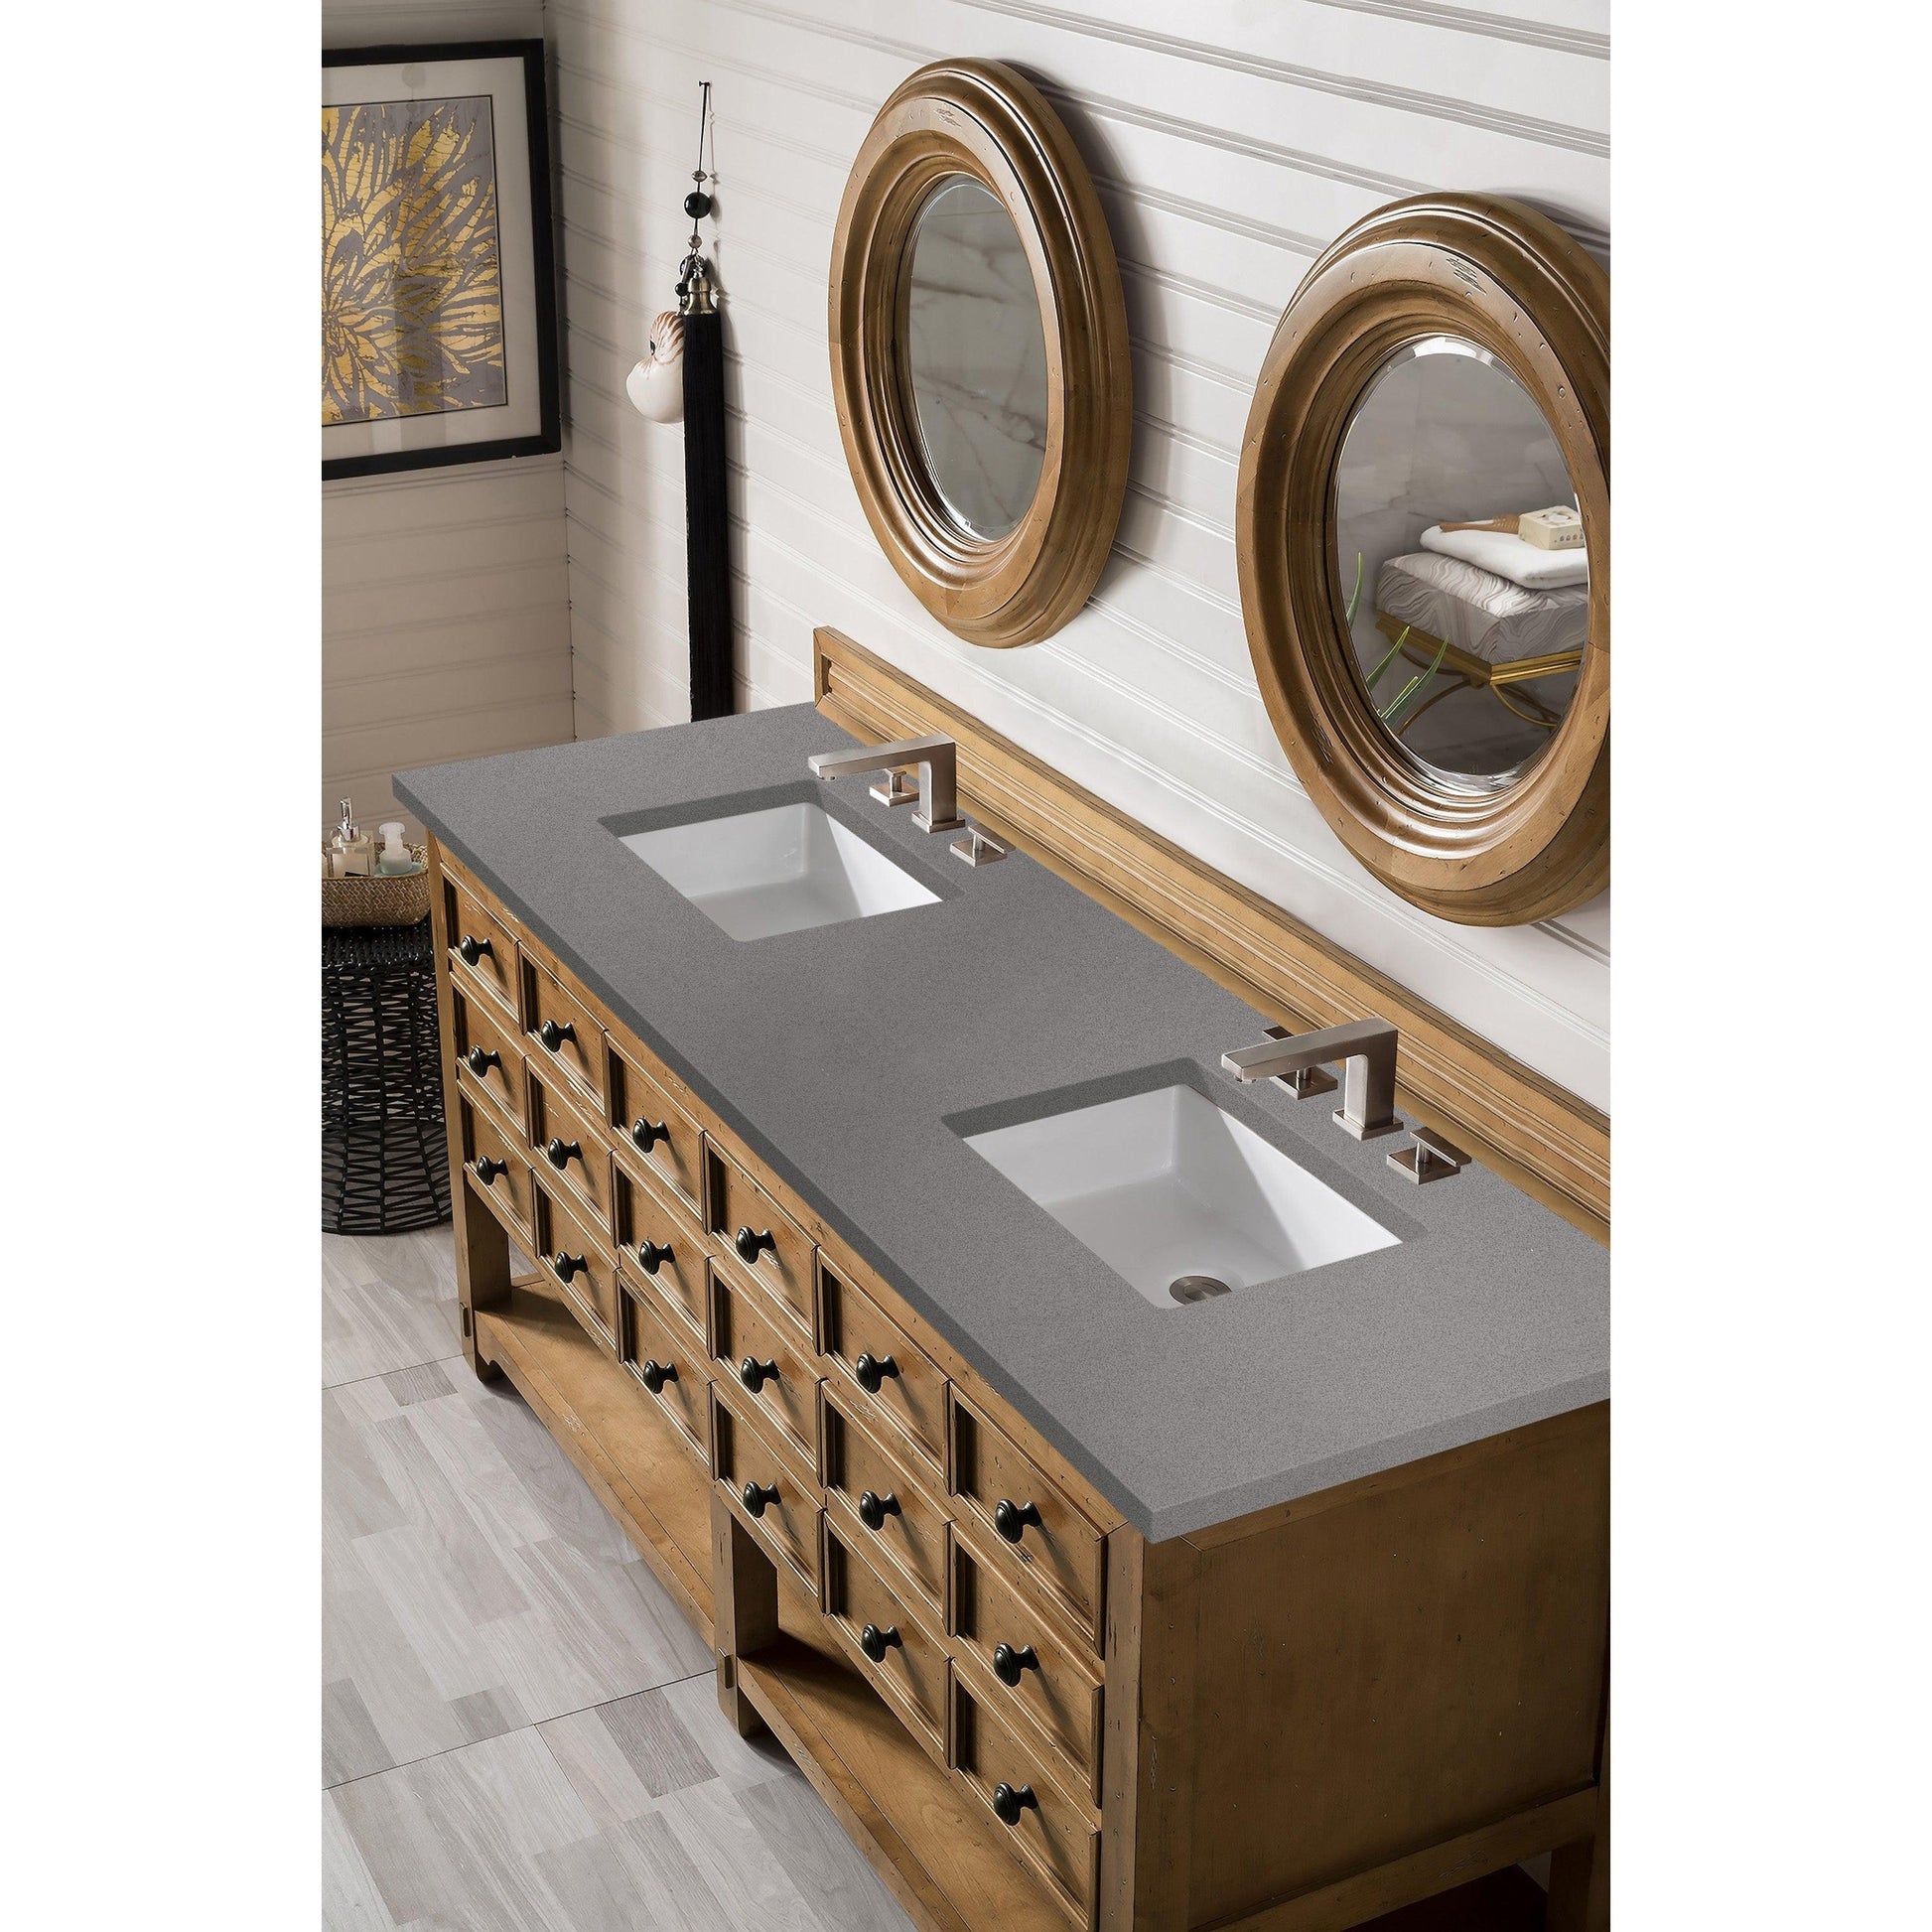 James Martin Columbia 72 Double Bathroom Vanity in Glossy White and Radiant  Gold with 10 cm Glossy White Solid Surface Top and Rectangular Sink